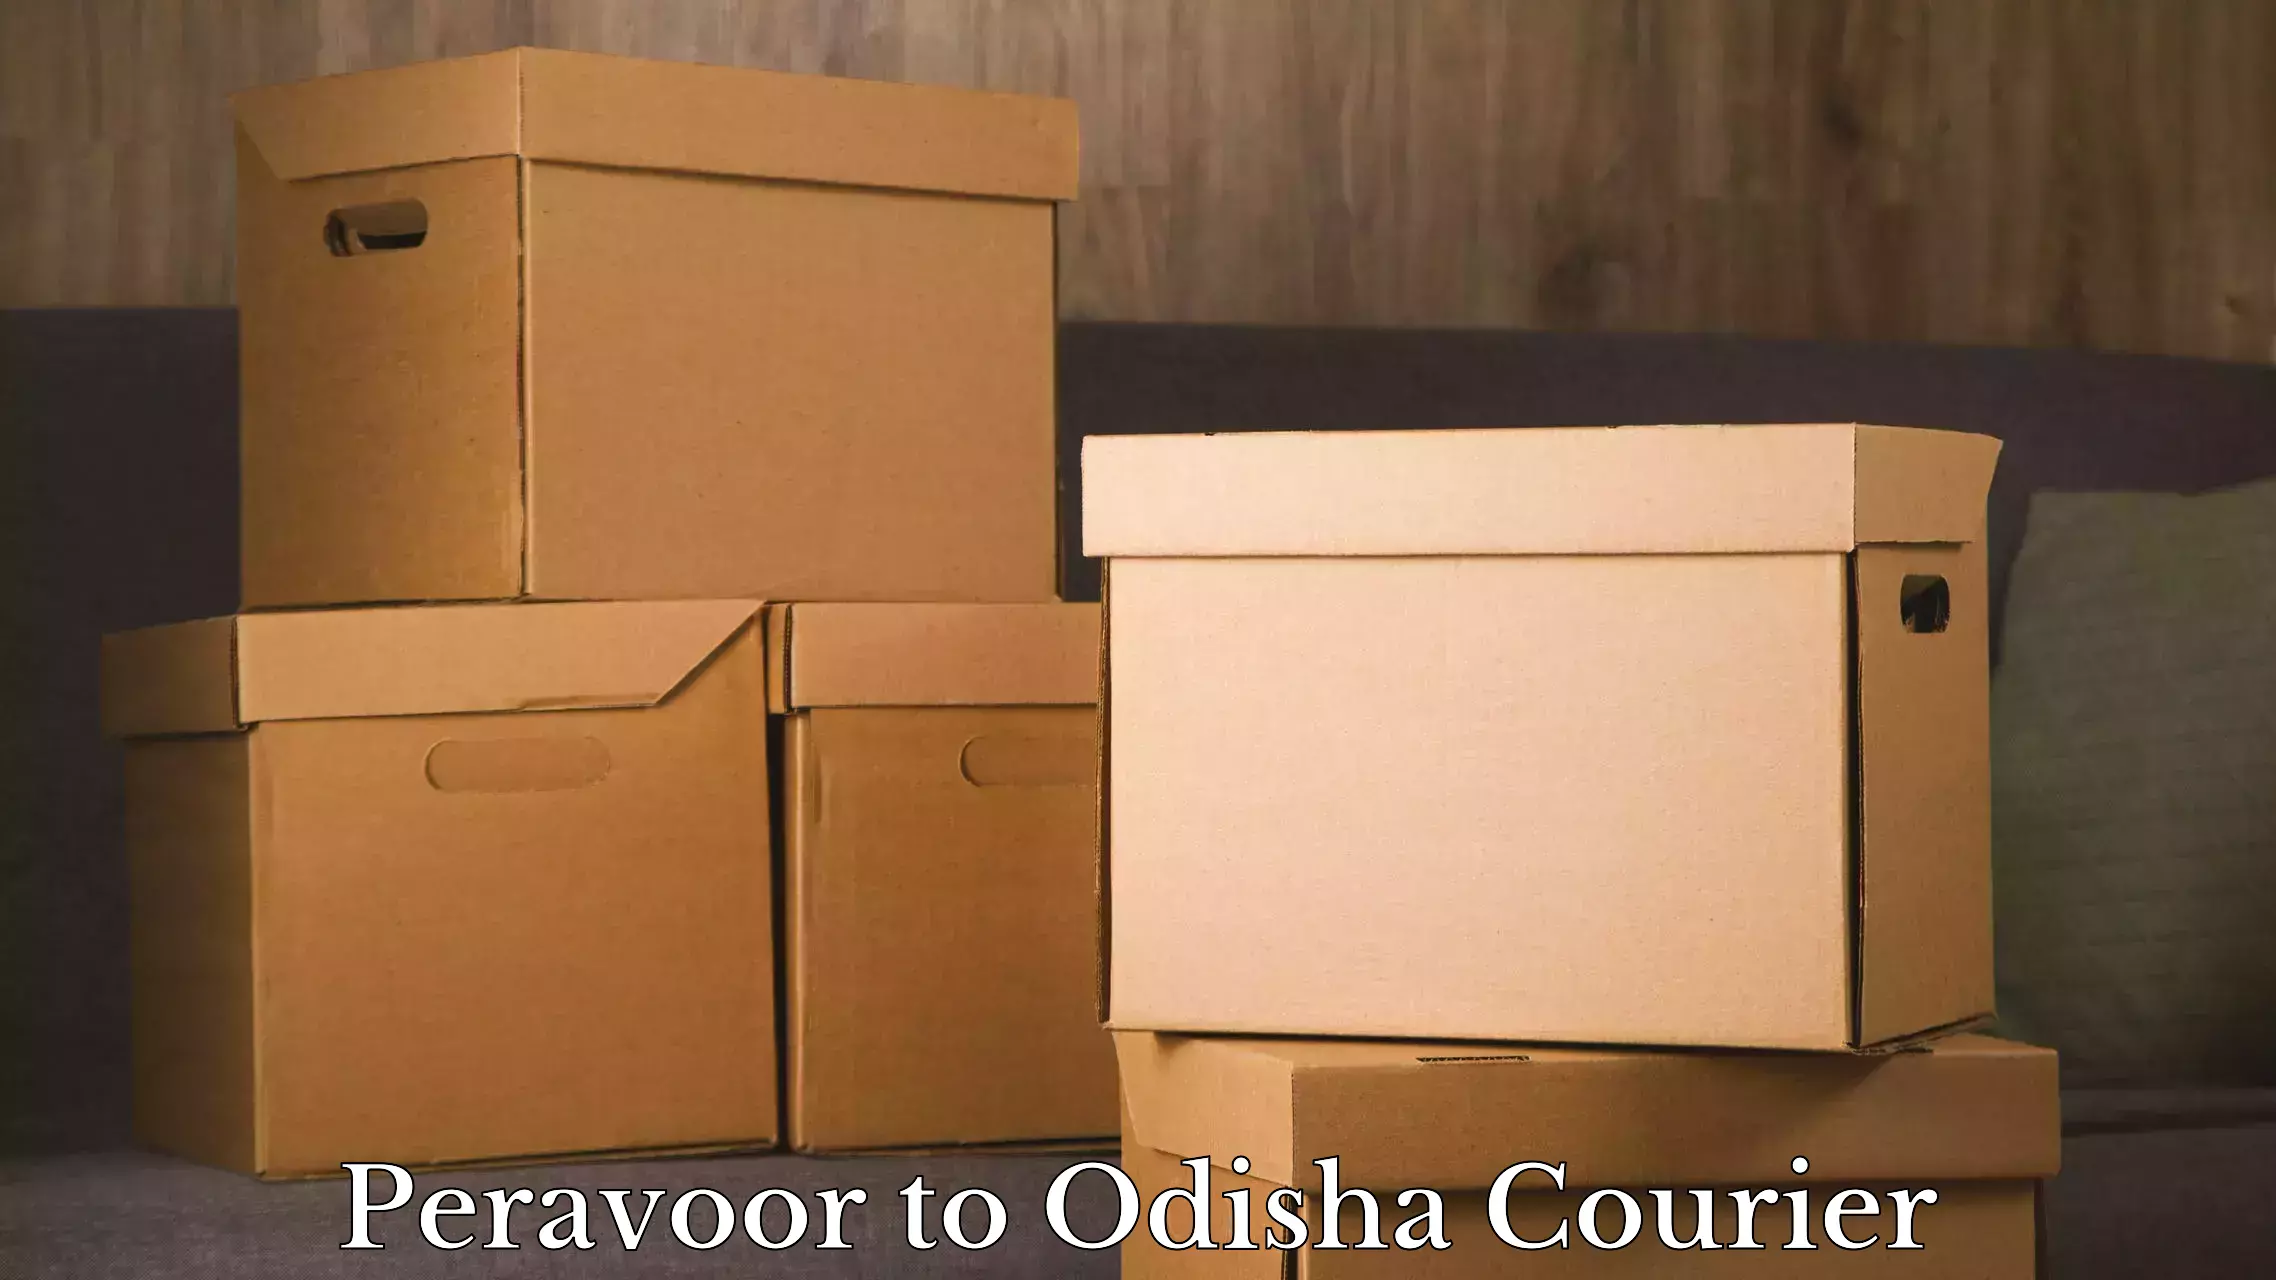 Quick luggage shipment in Peravoor to Bhubaneswar